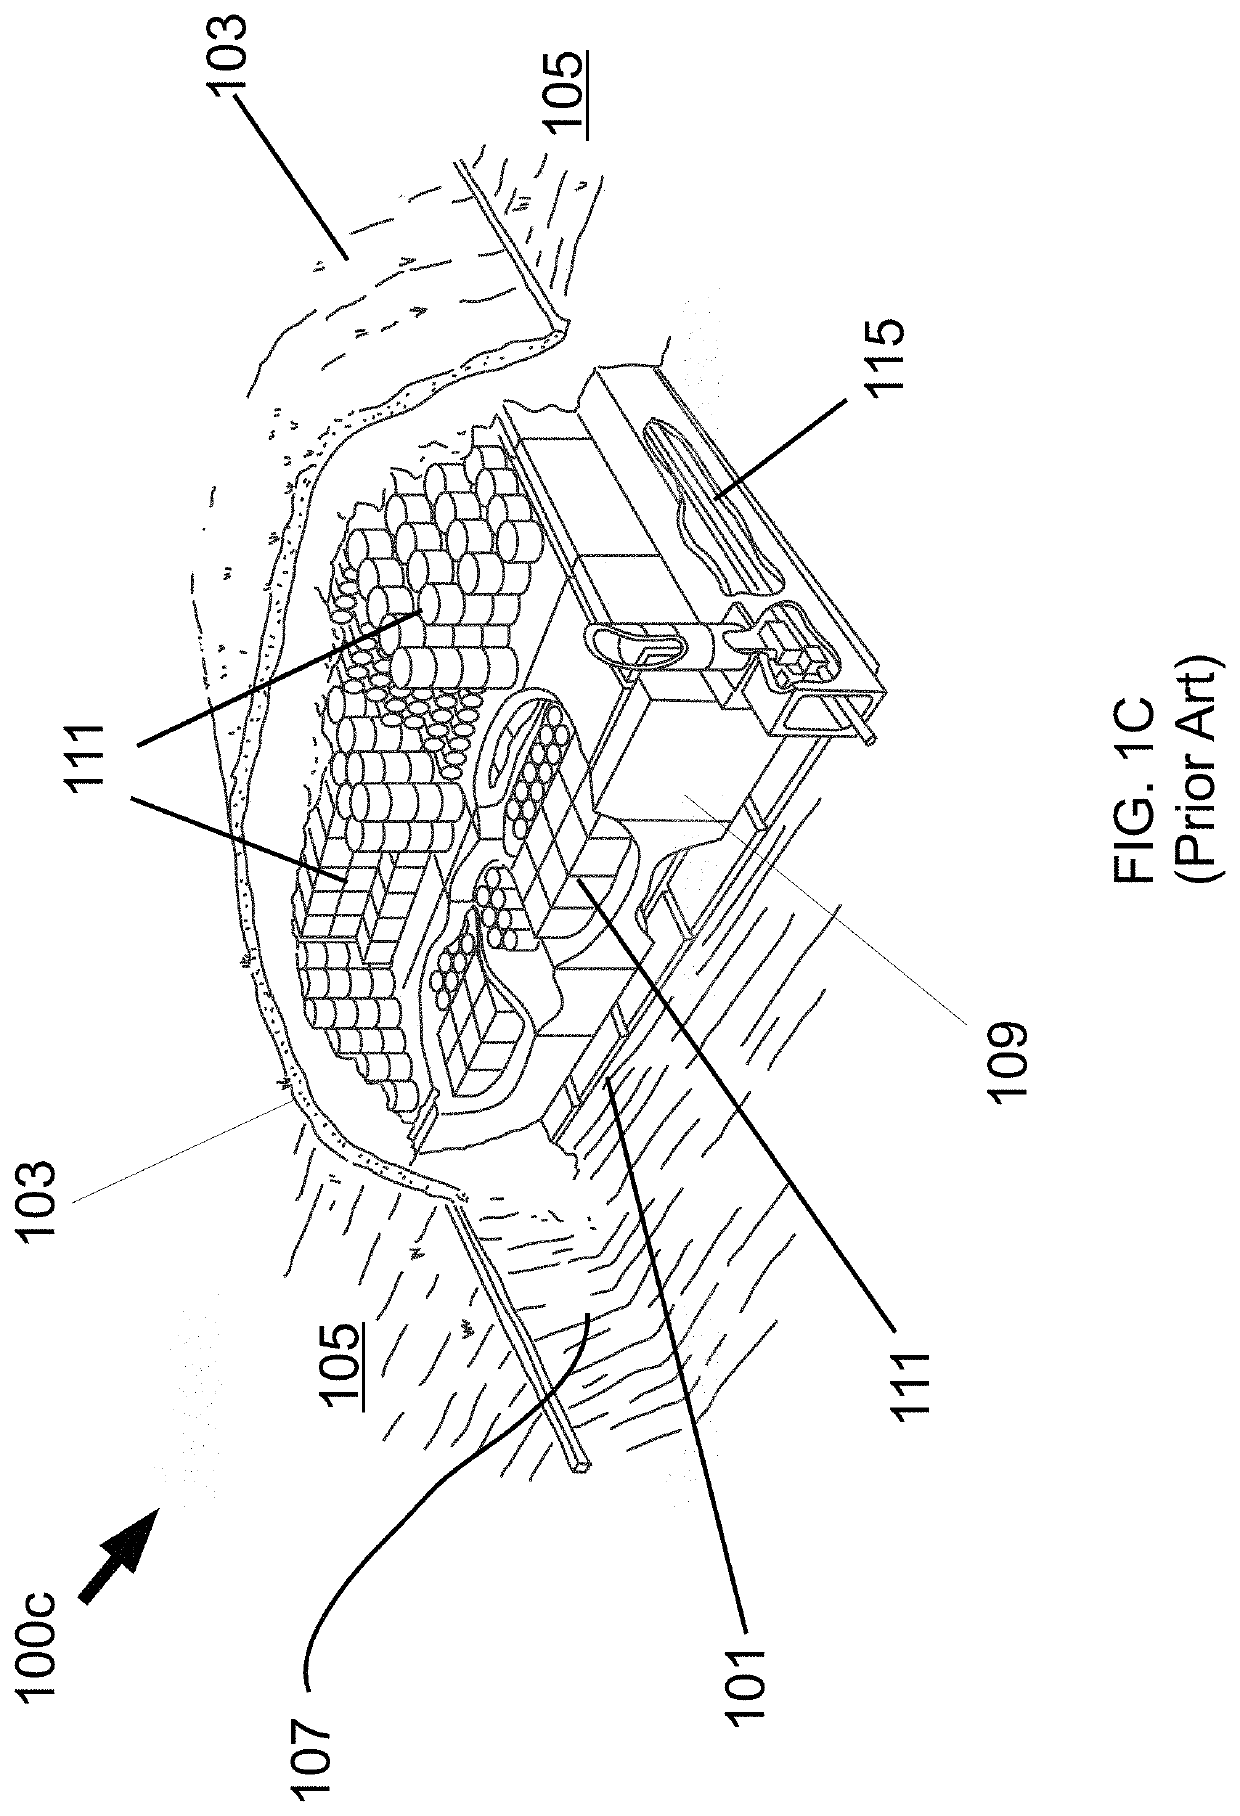 Systems and methods for low level waste disposal